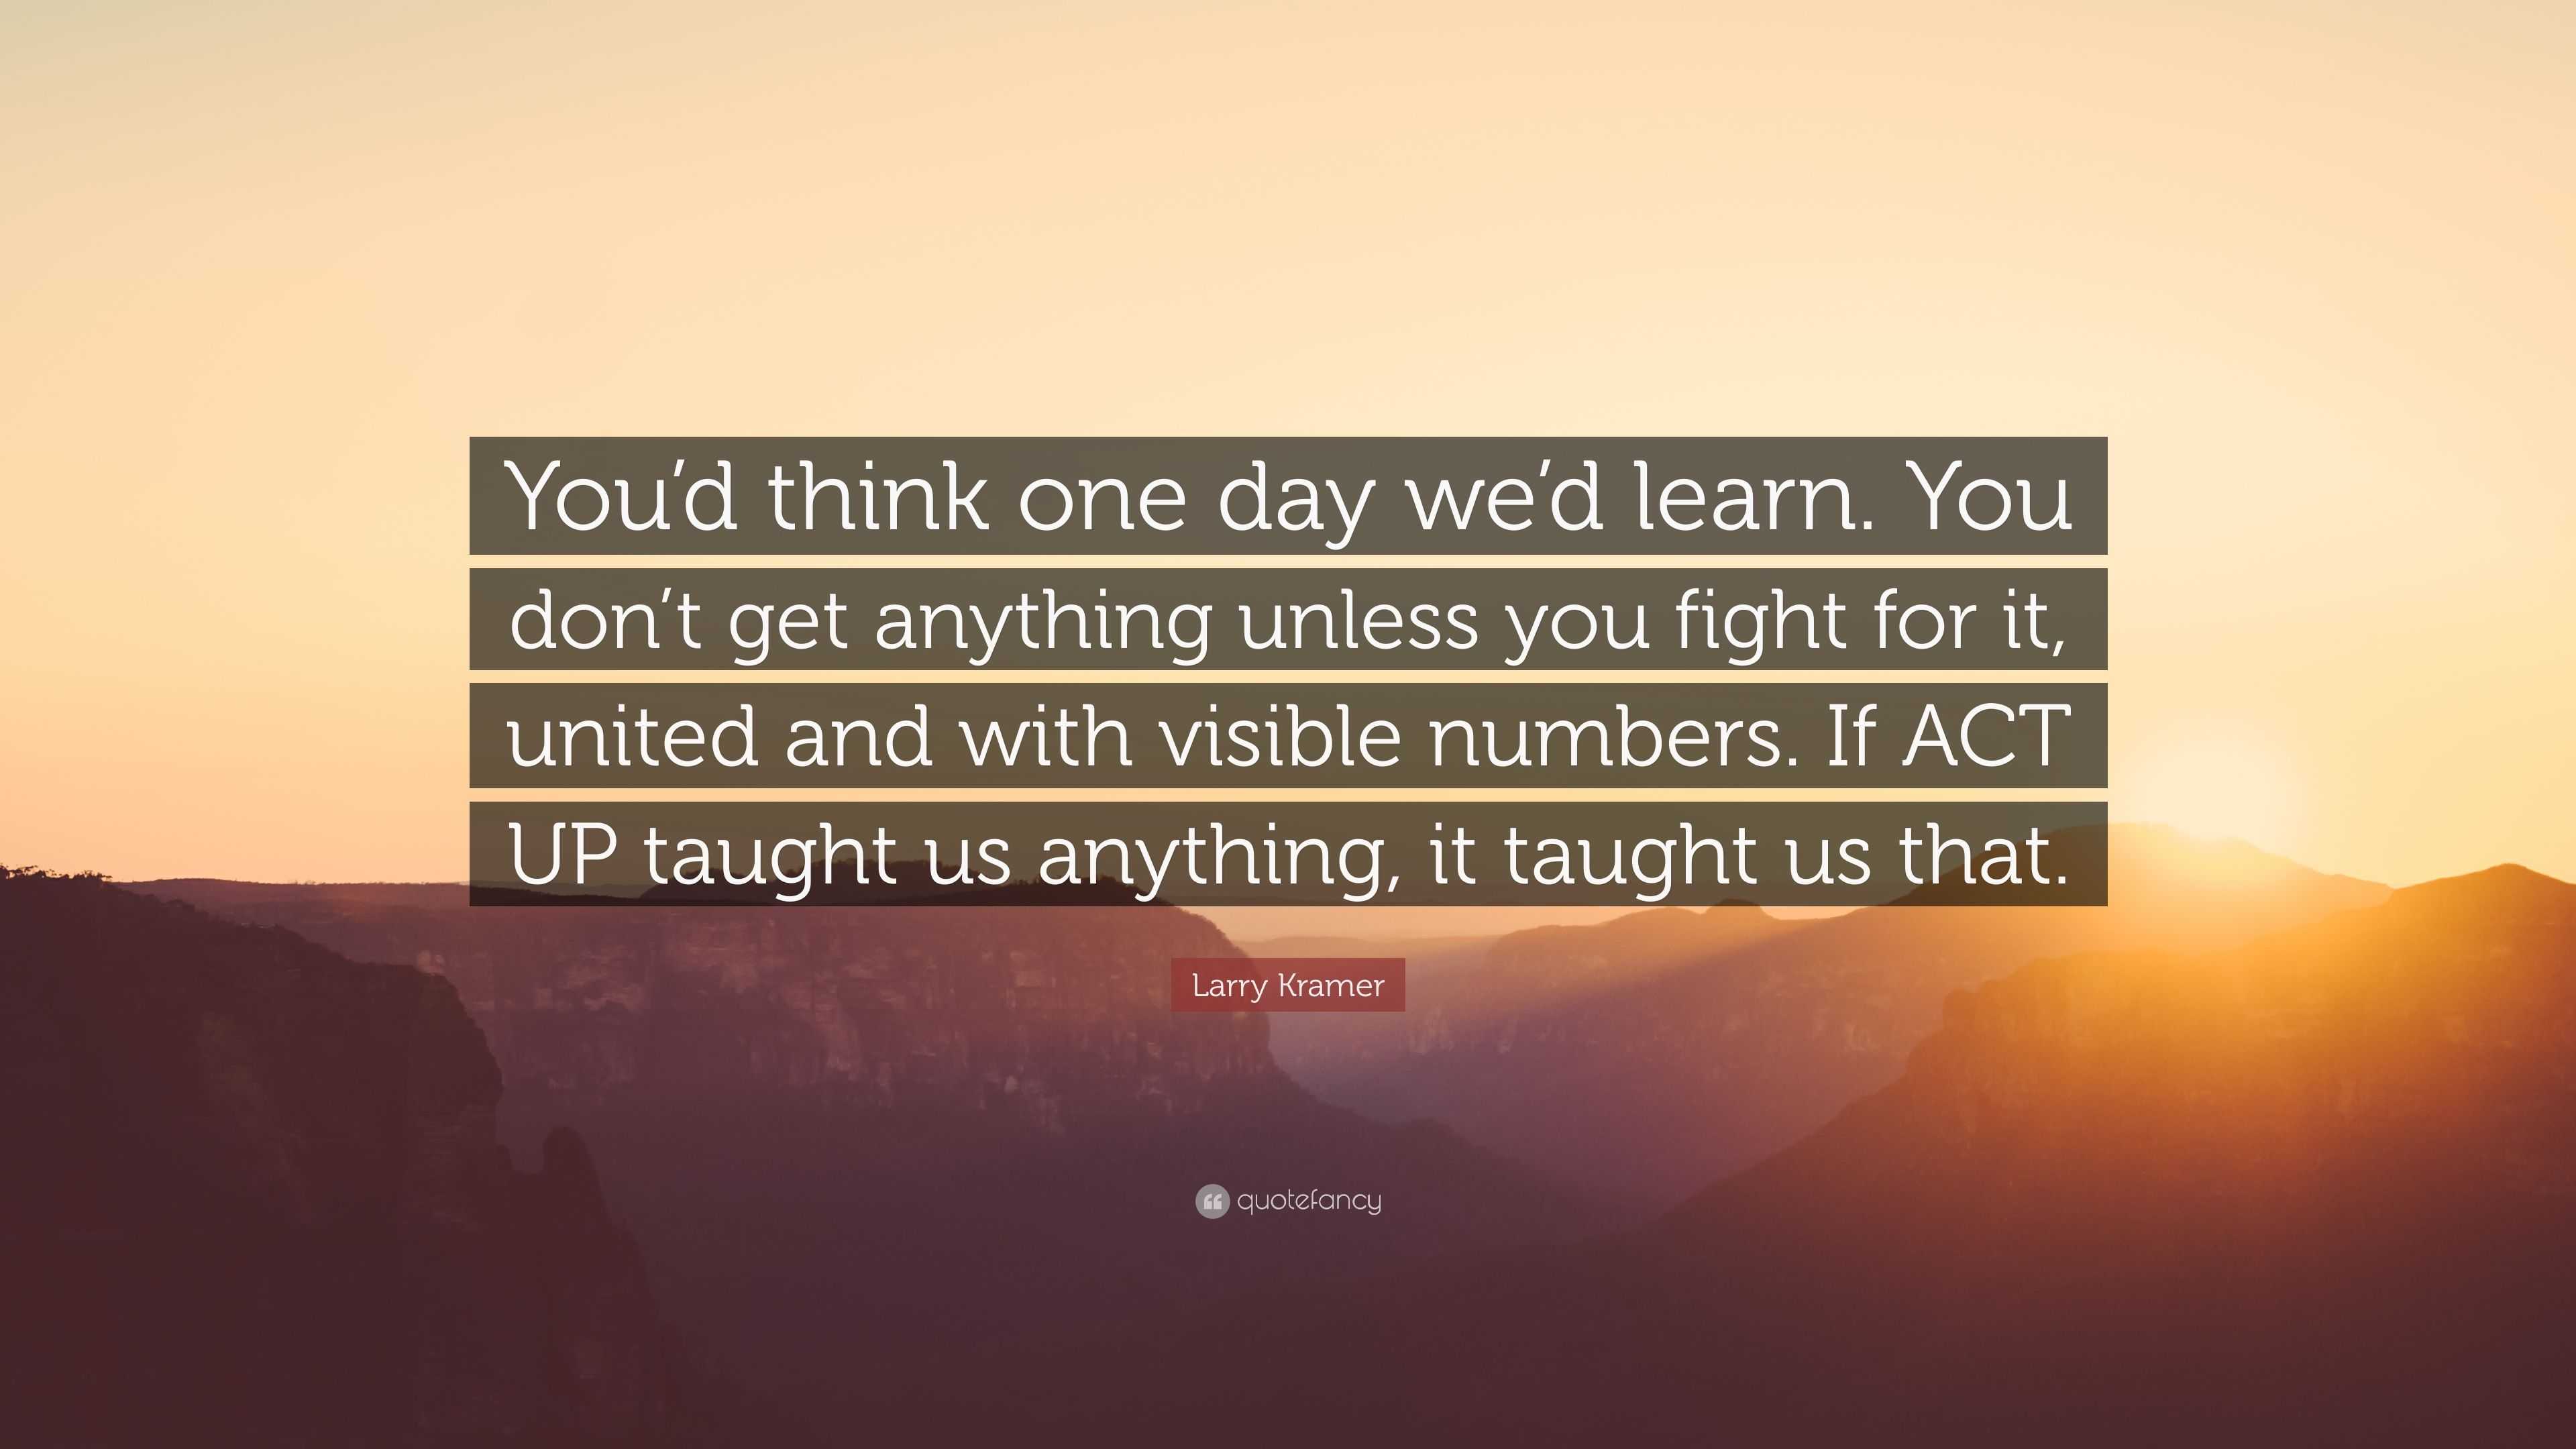 https://quotefancy.com/media/wallpaper/3840x2160/5358547-Larry-Kramer-Quote-You-d-think-one-day-we-d-learn-You-don-t-get.jpg